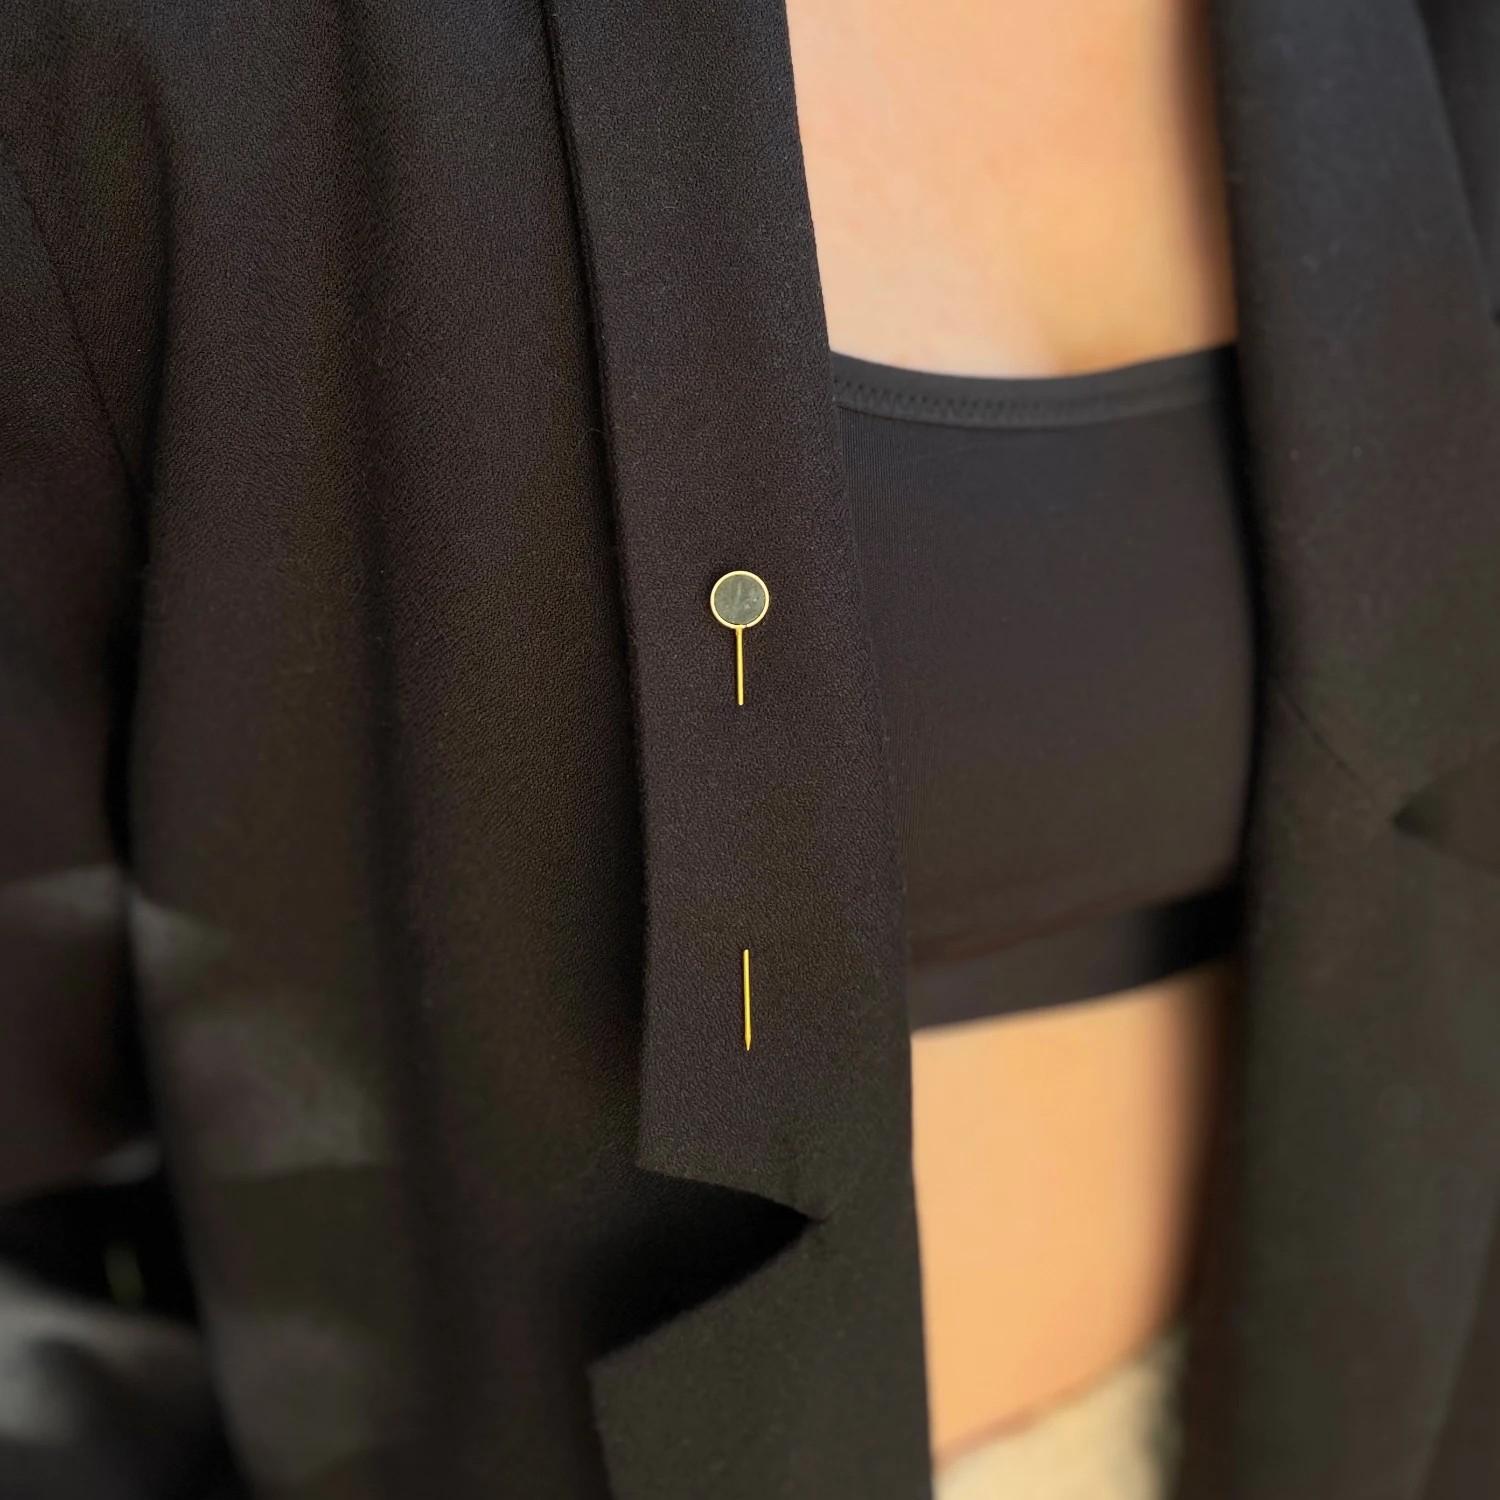 Pins are pieces of jewellery traditionally used by men to decorate jacket lapels or ties. In fact, you can style them in many more ways. They look great pinned to a sweater, dress or hat. You can pin them vertically, horizontally, or diagonally. One